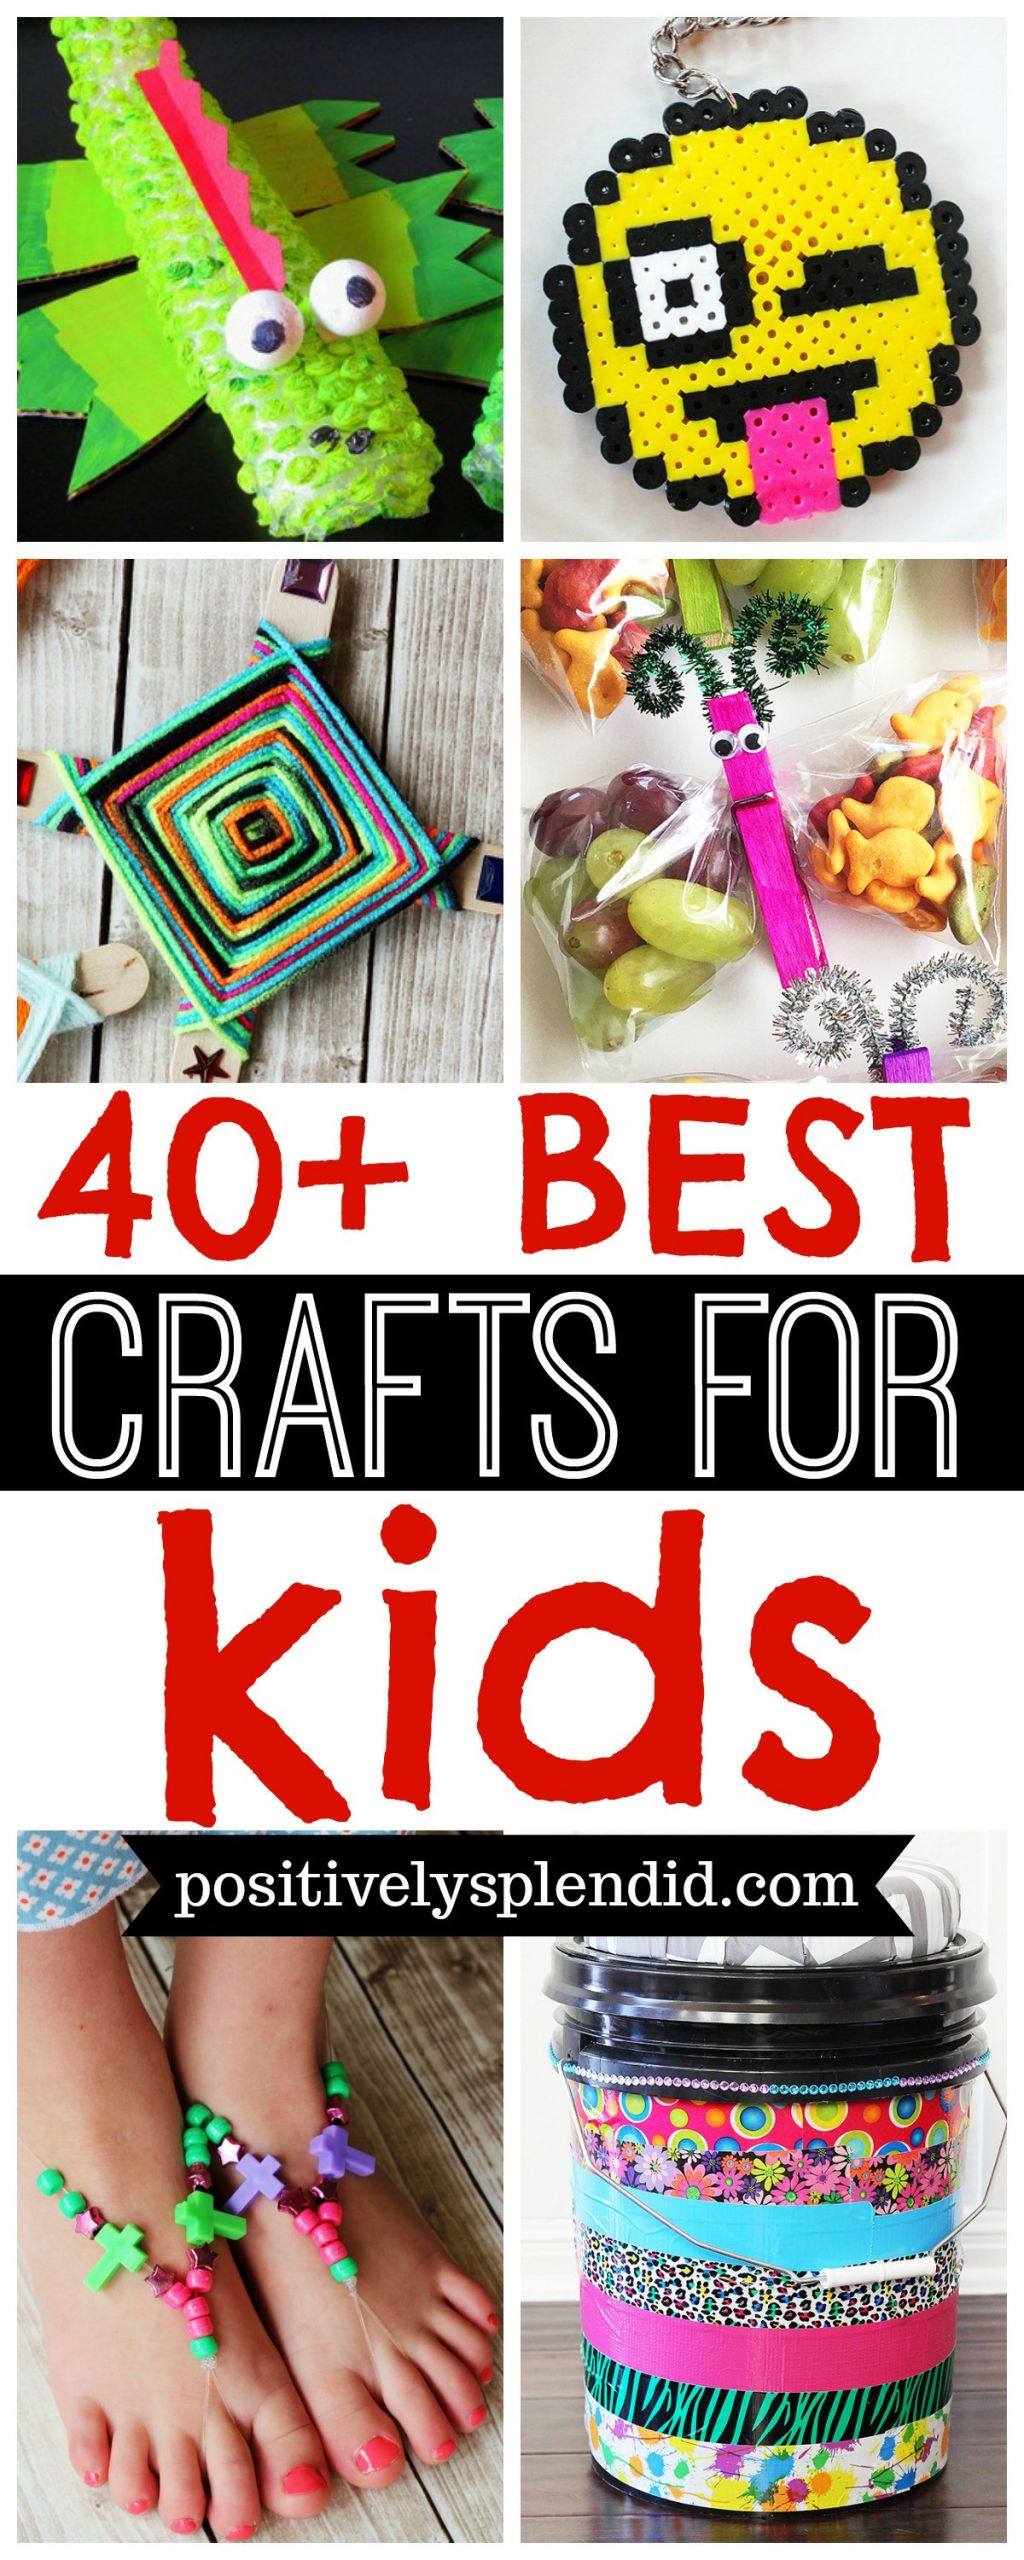 The Best Ideas For Kids
 40 Best Kids Craft Ideas The ULTIMATE list of crafts